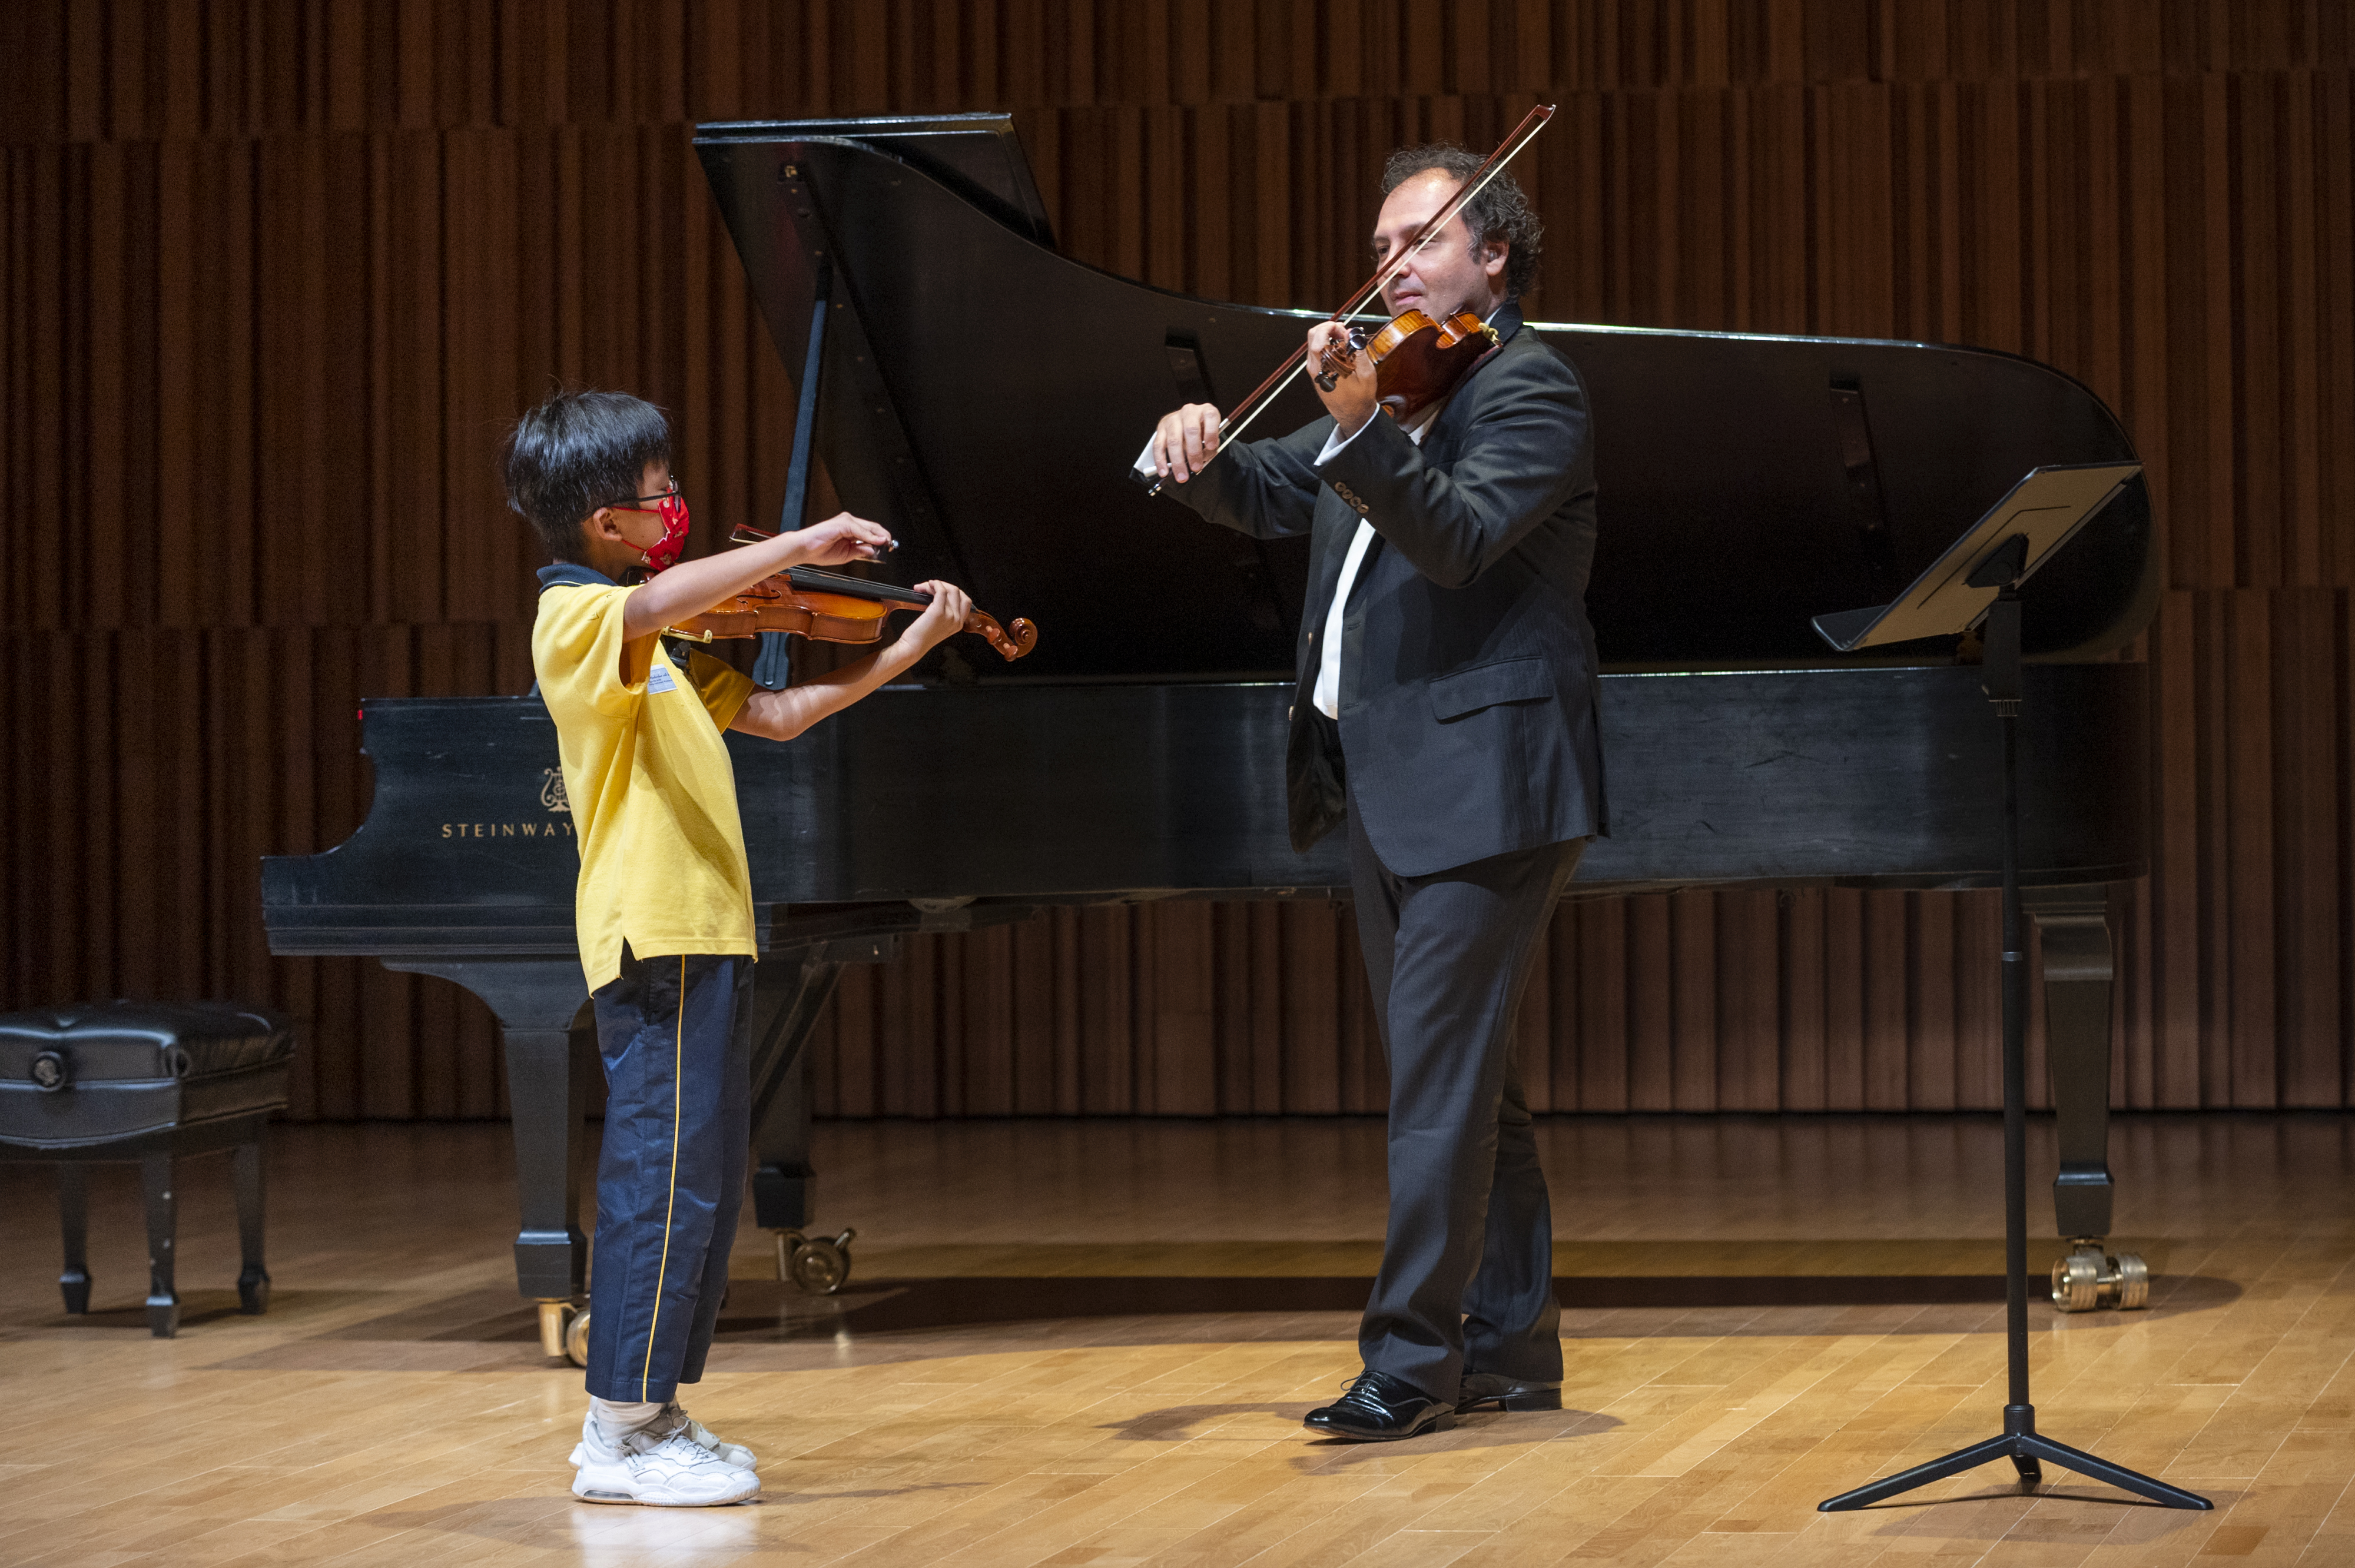 Meet the Artist: String Instrument Workshop with Gian Paolo Peloso